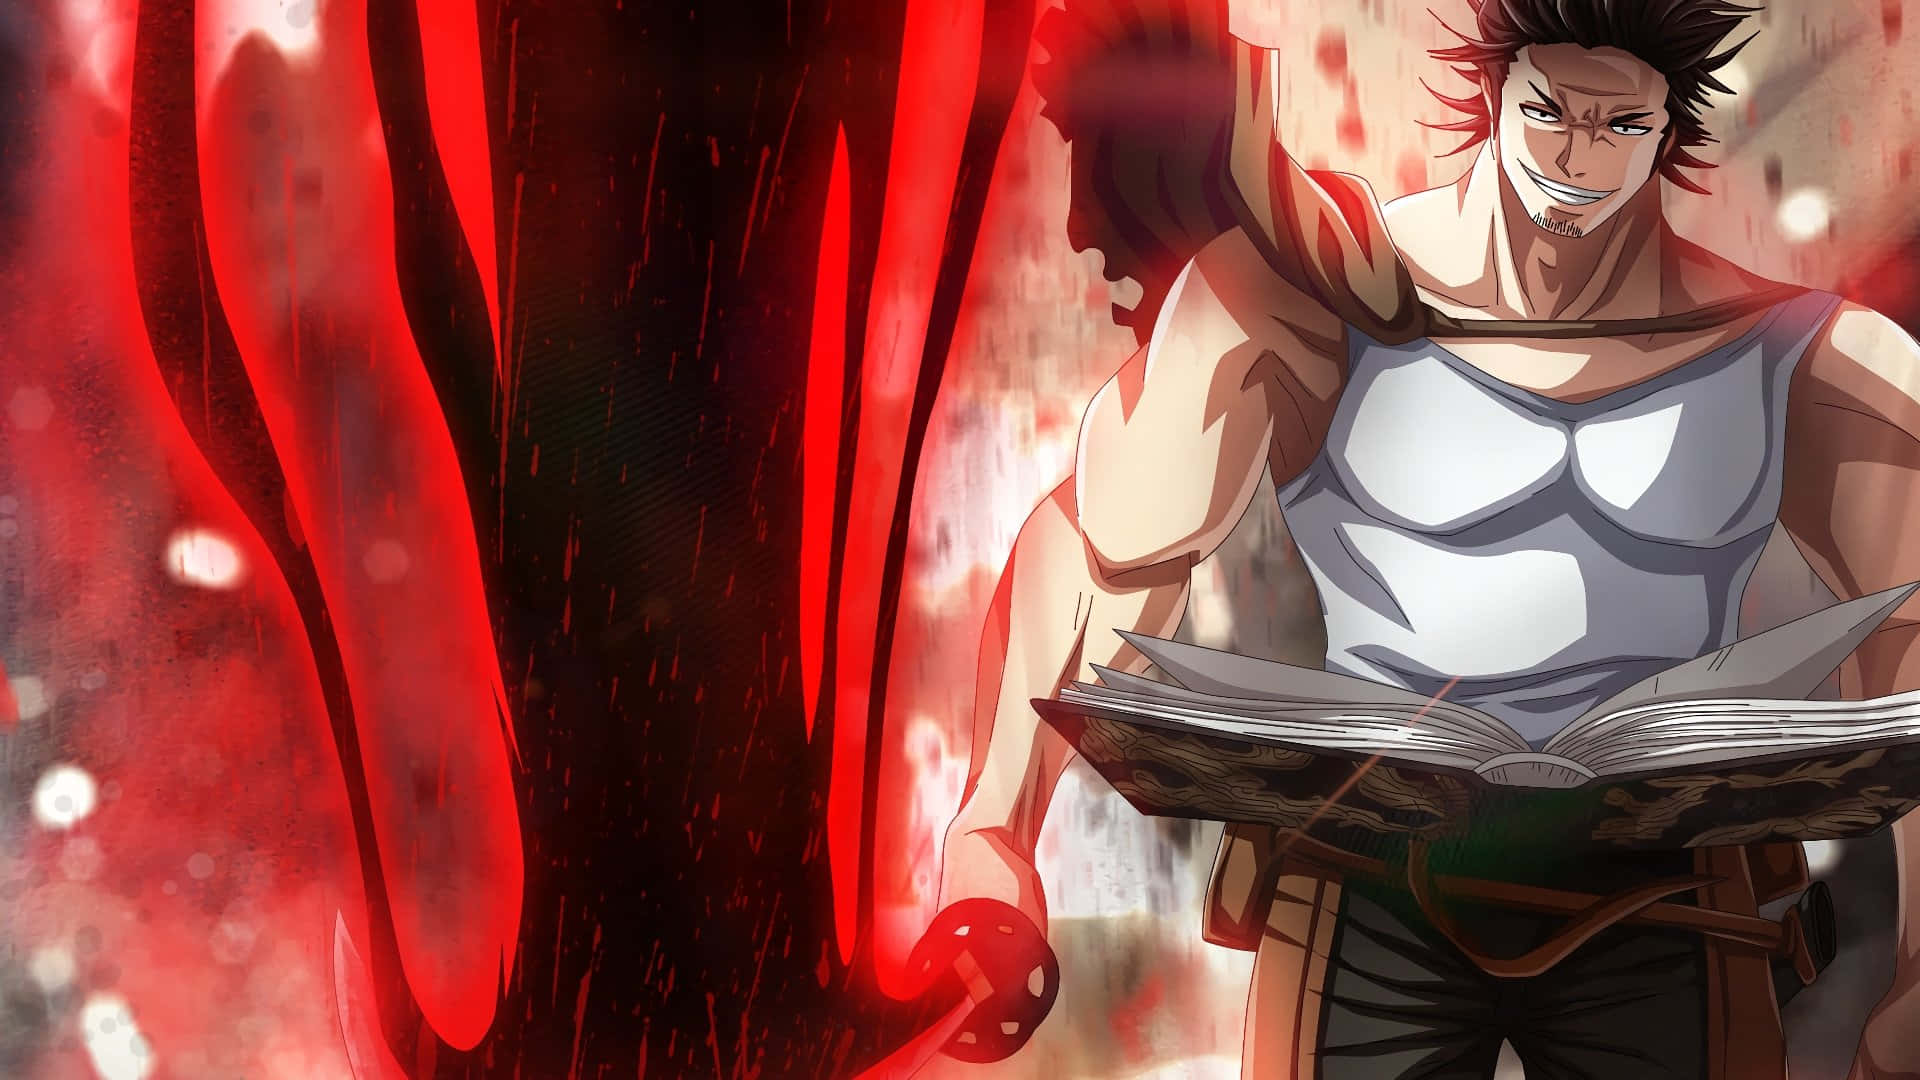 The Determined Yami From Black Clover Wallpaper